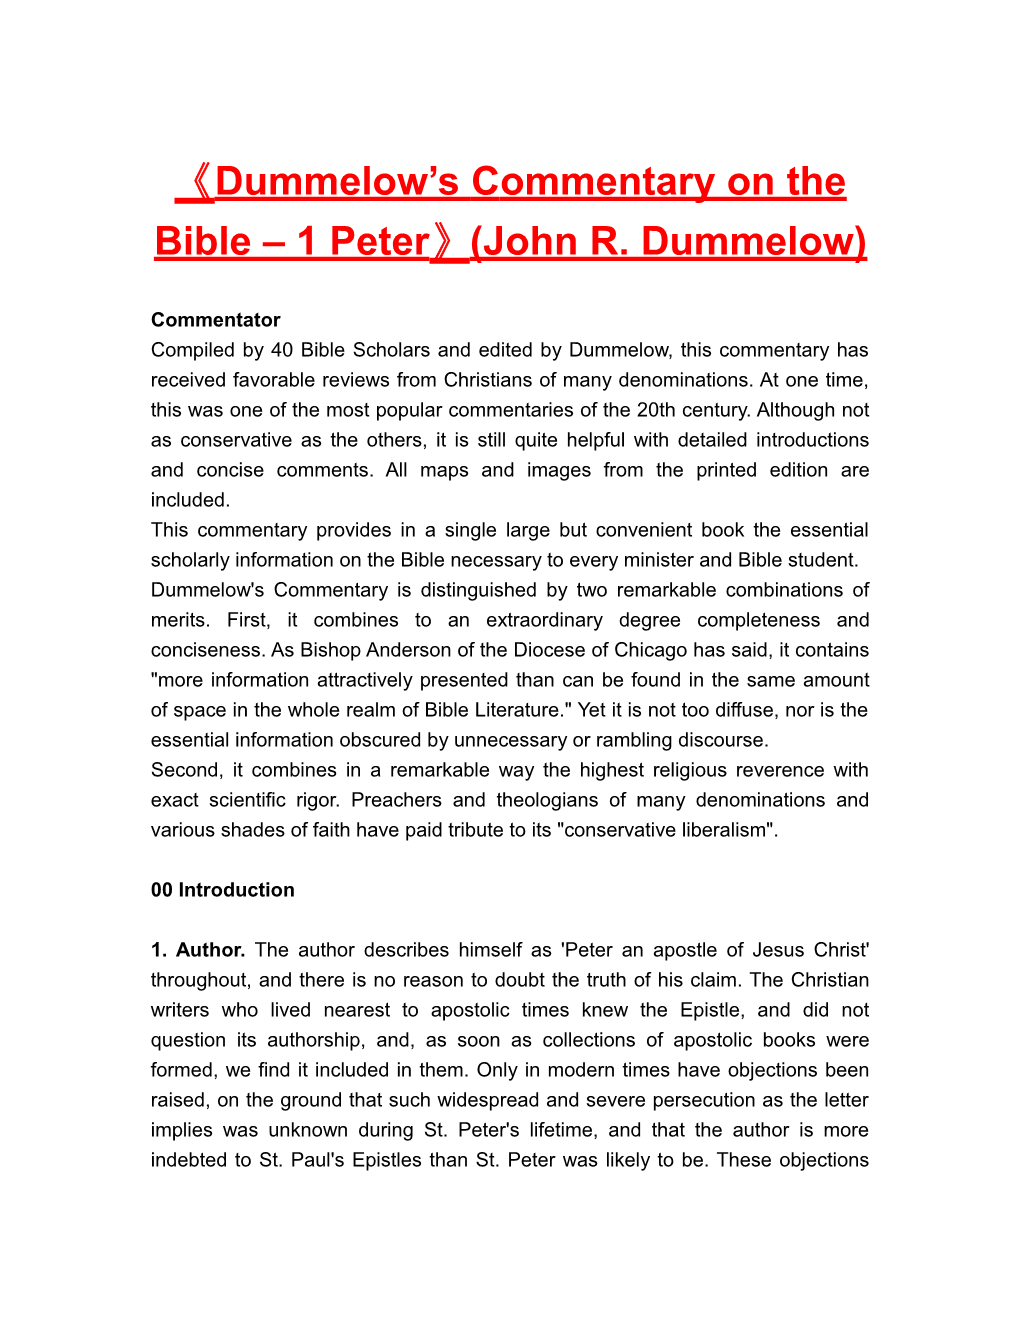 Dummelow S Commentary on the Bible 1 Peter (John R. Dummelow)